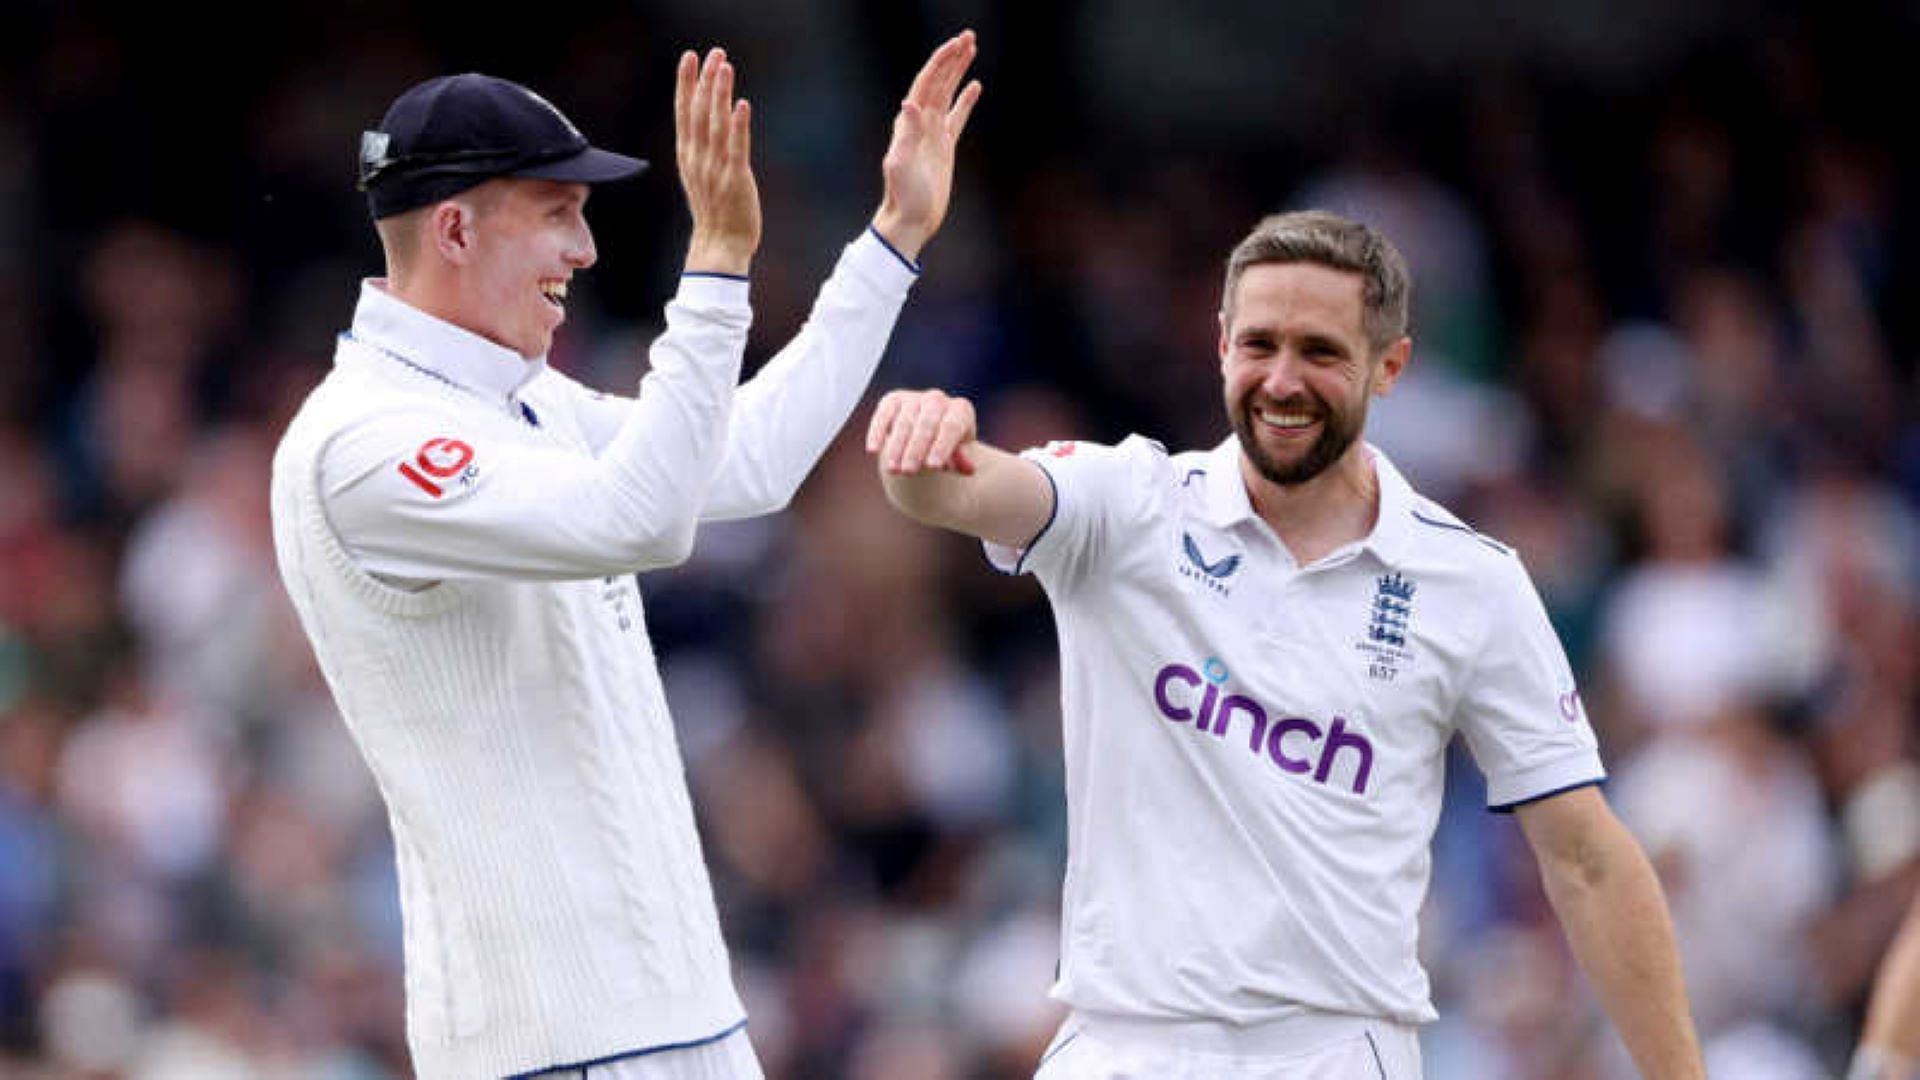 Chris Woakes and Zak Crawley were instrumental in England drawing the Ashes series